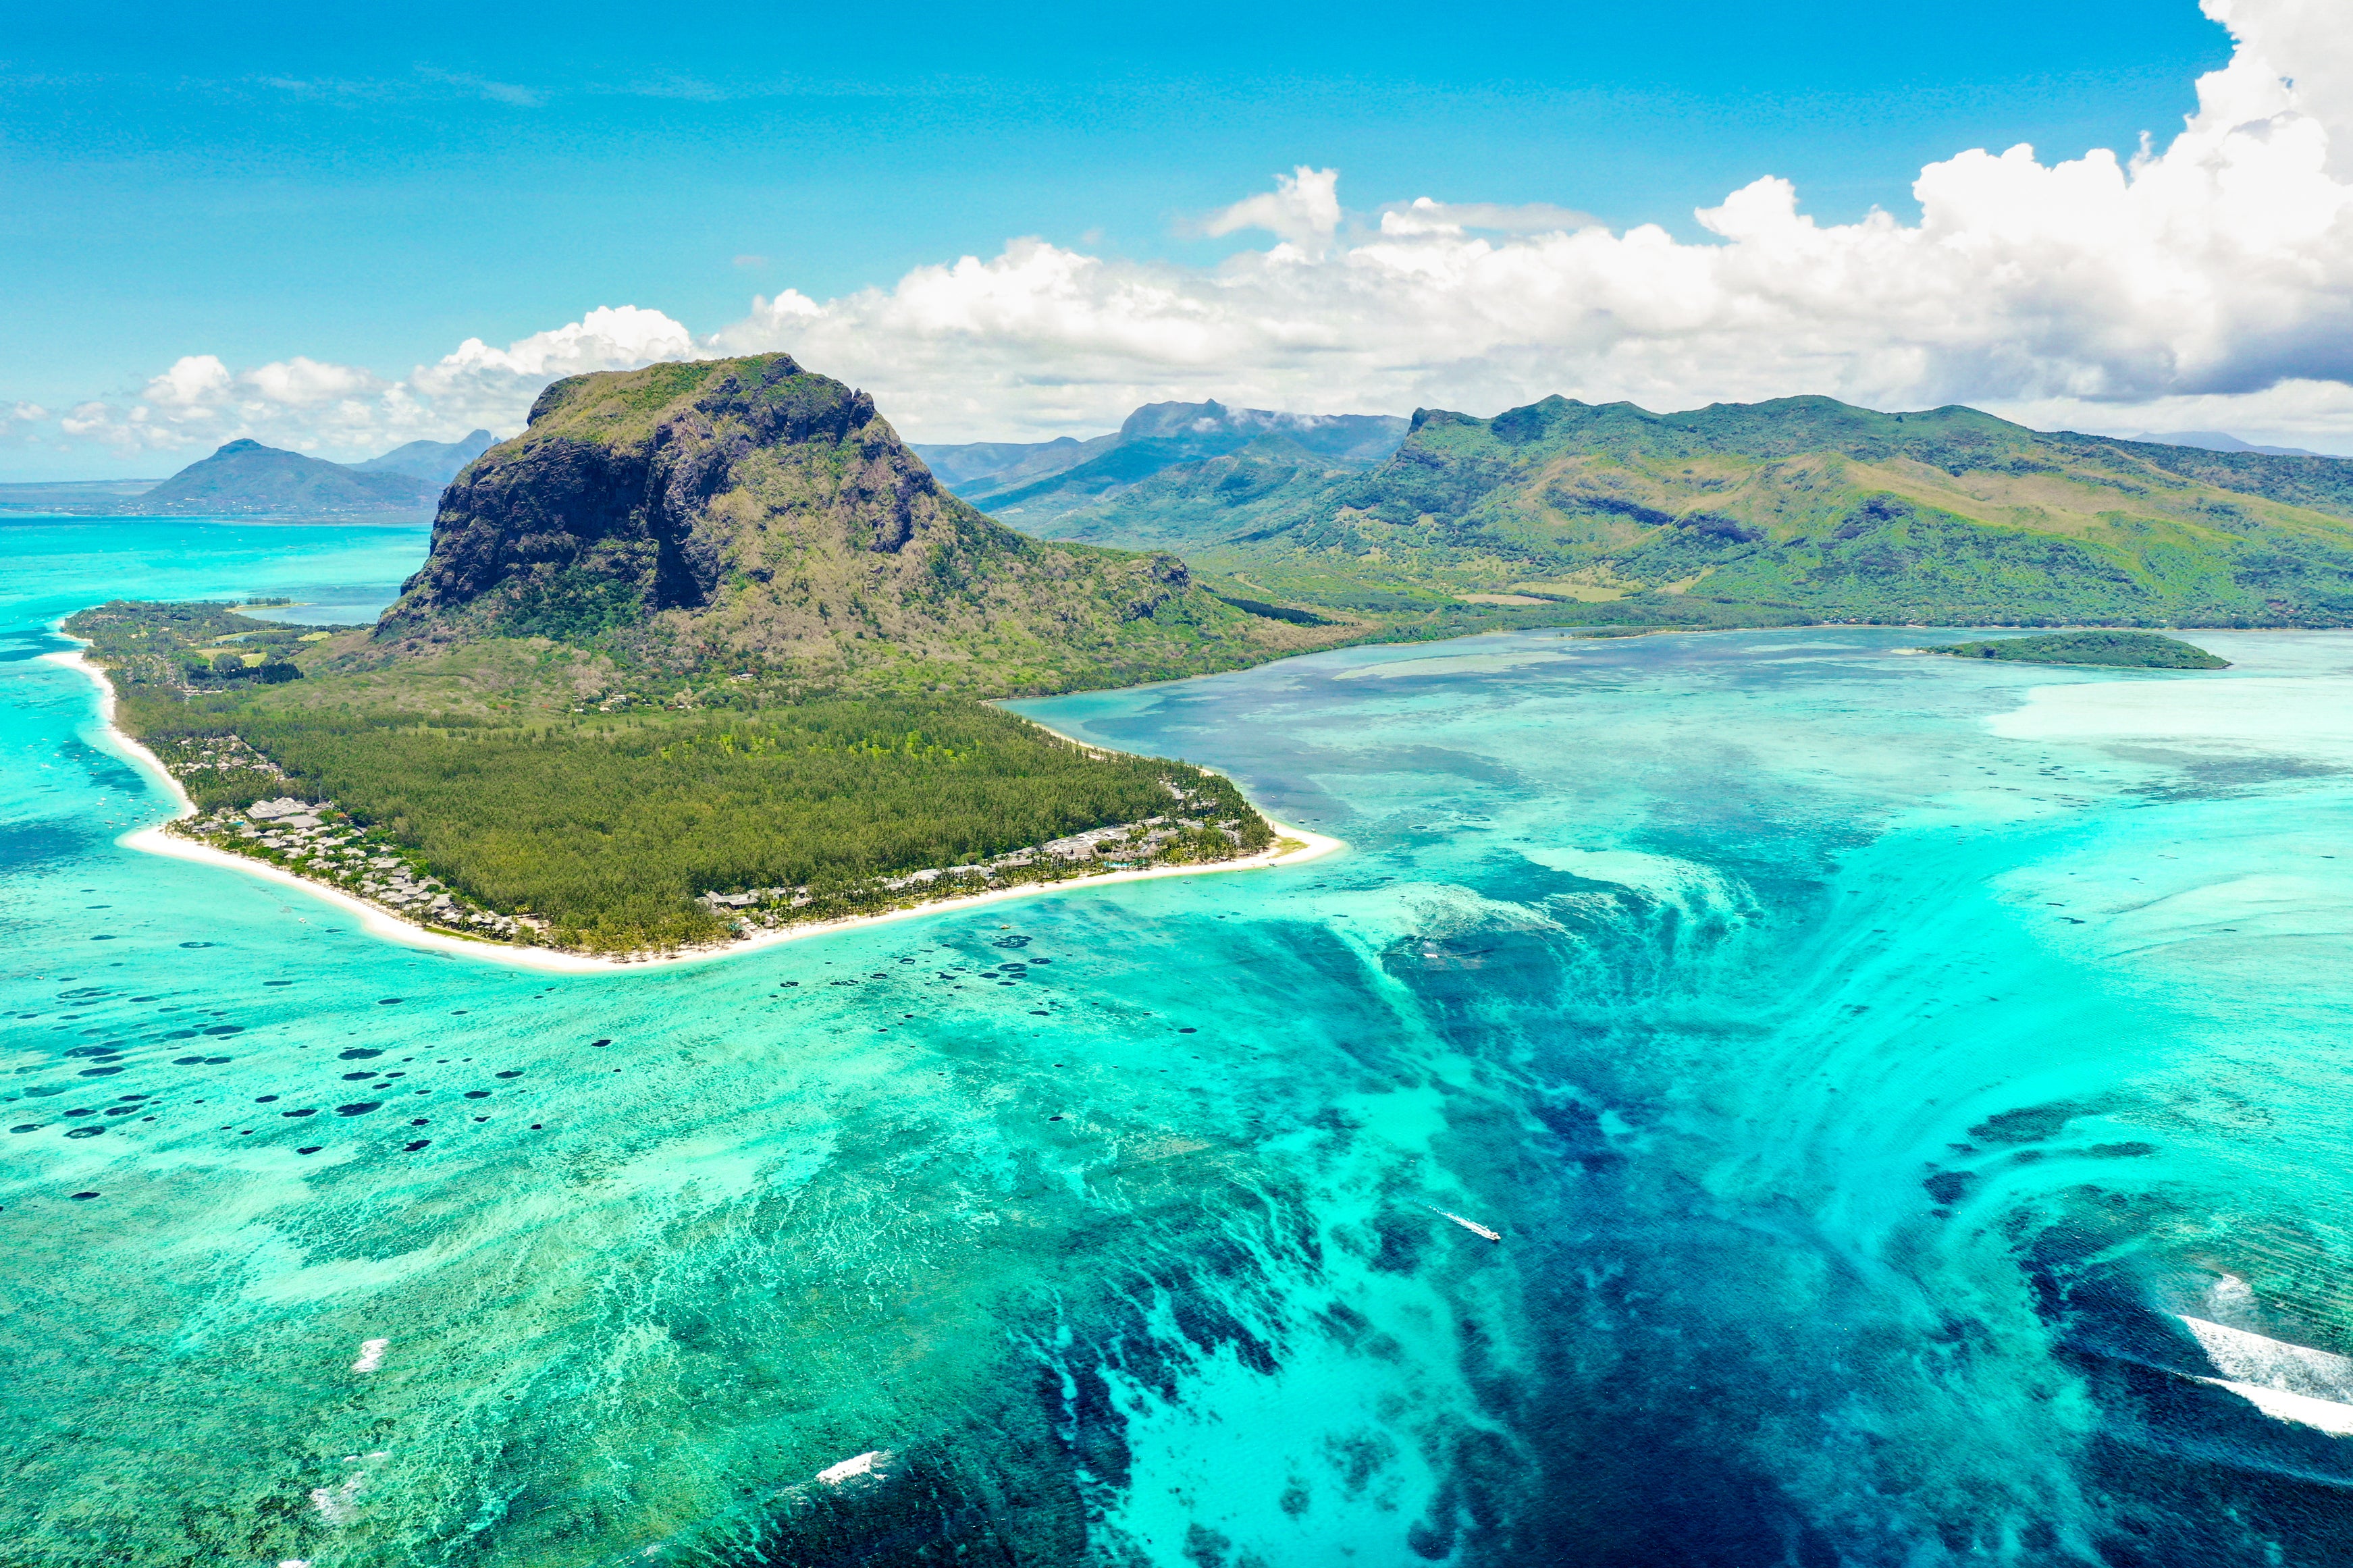 Le Morne Brabant mountain and underwater waterfall